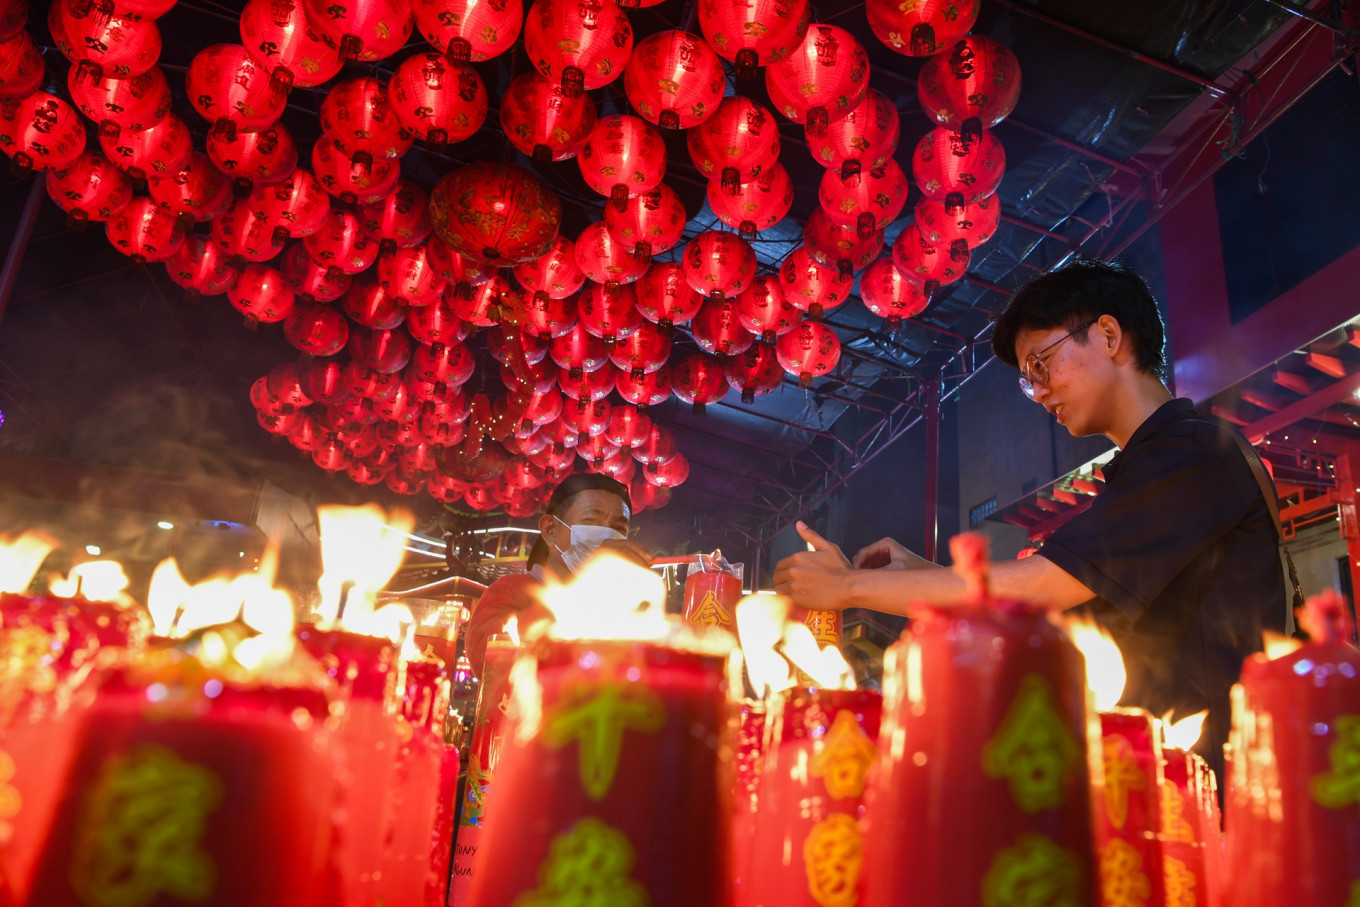 Jakarta celebrates Chinese New Year with tradition and fun